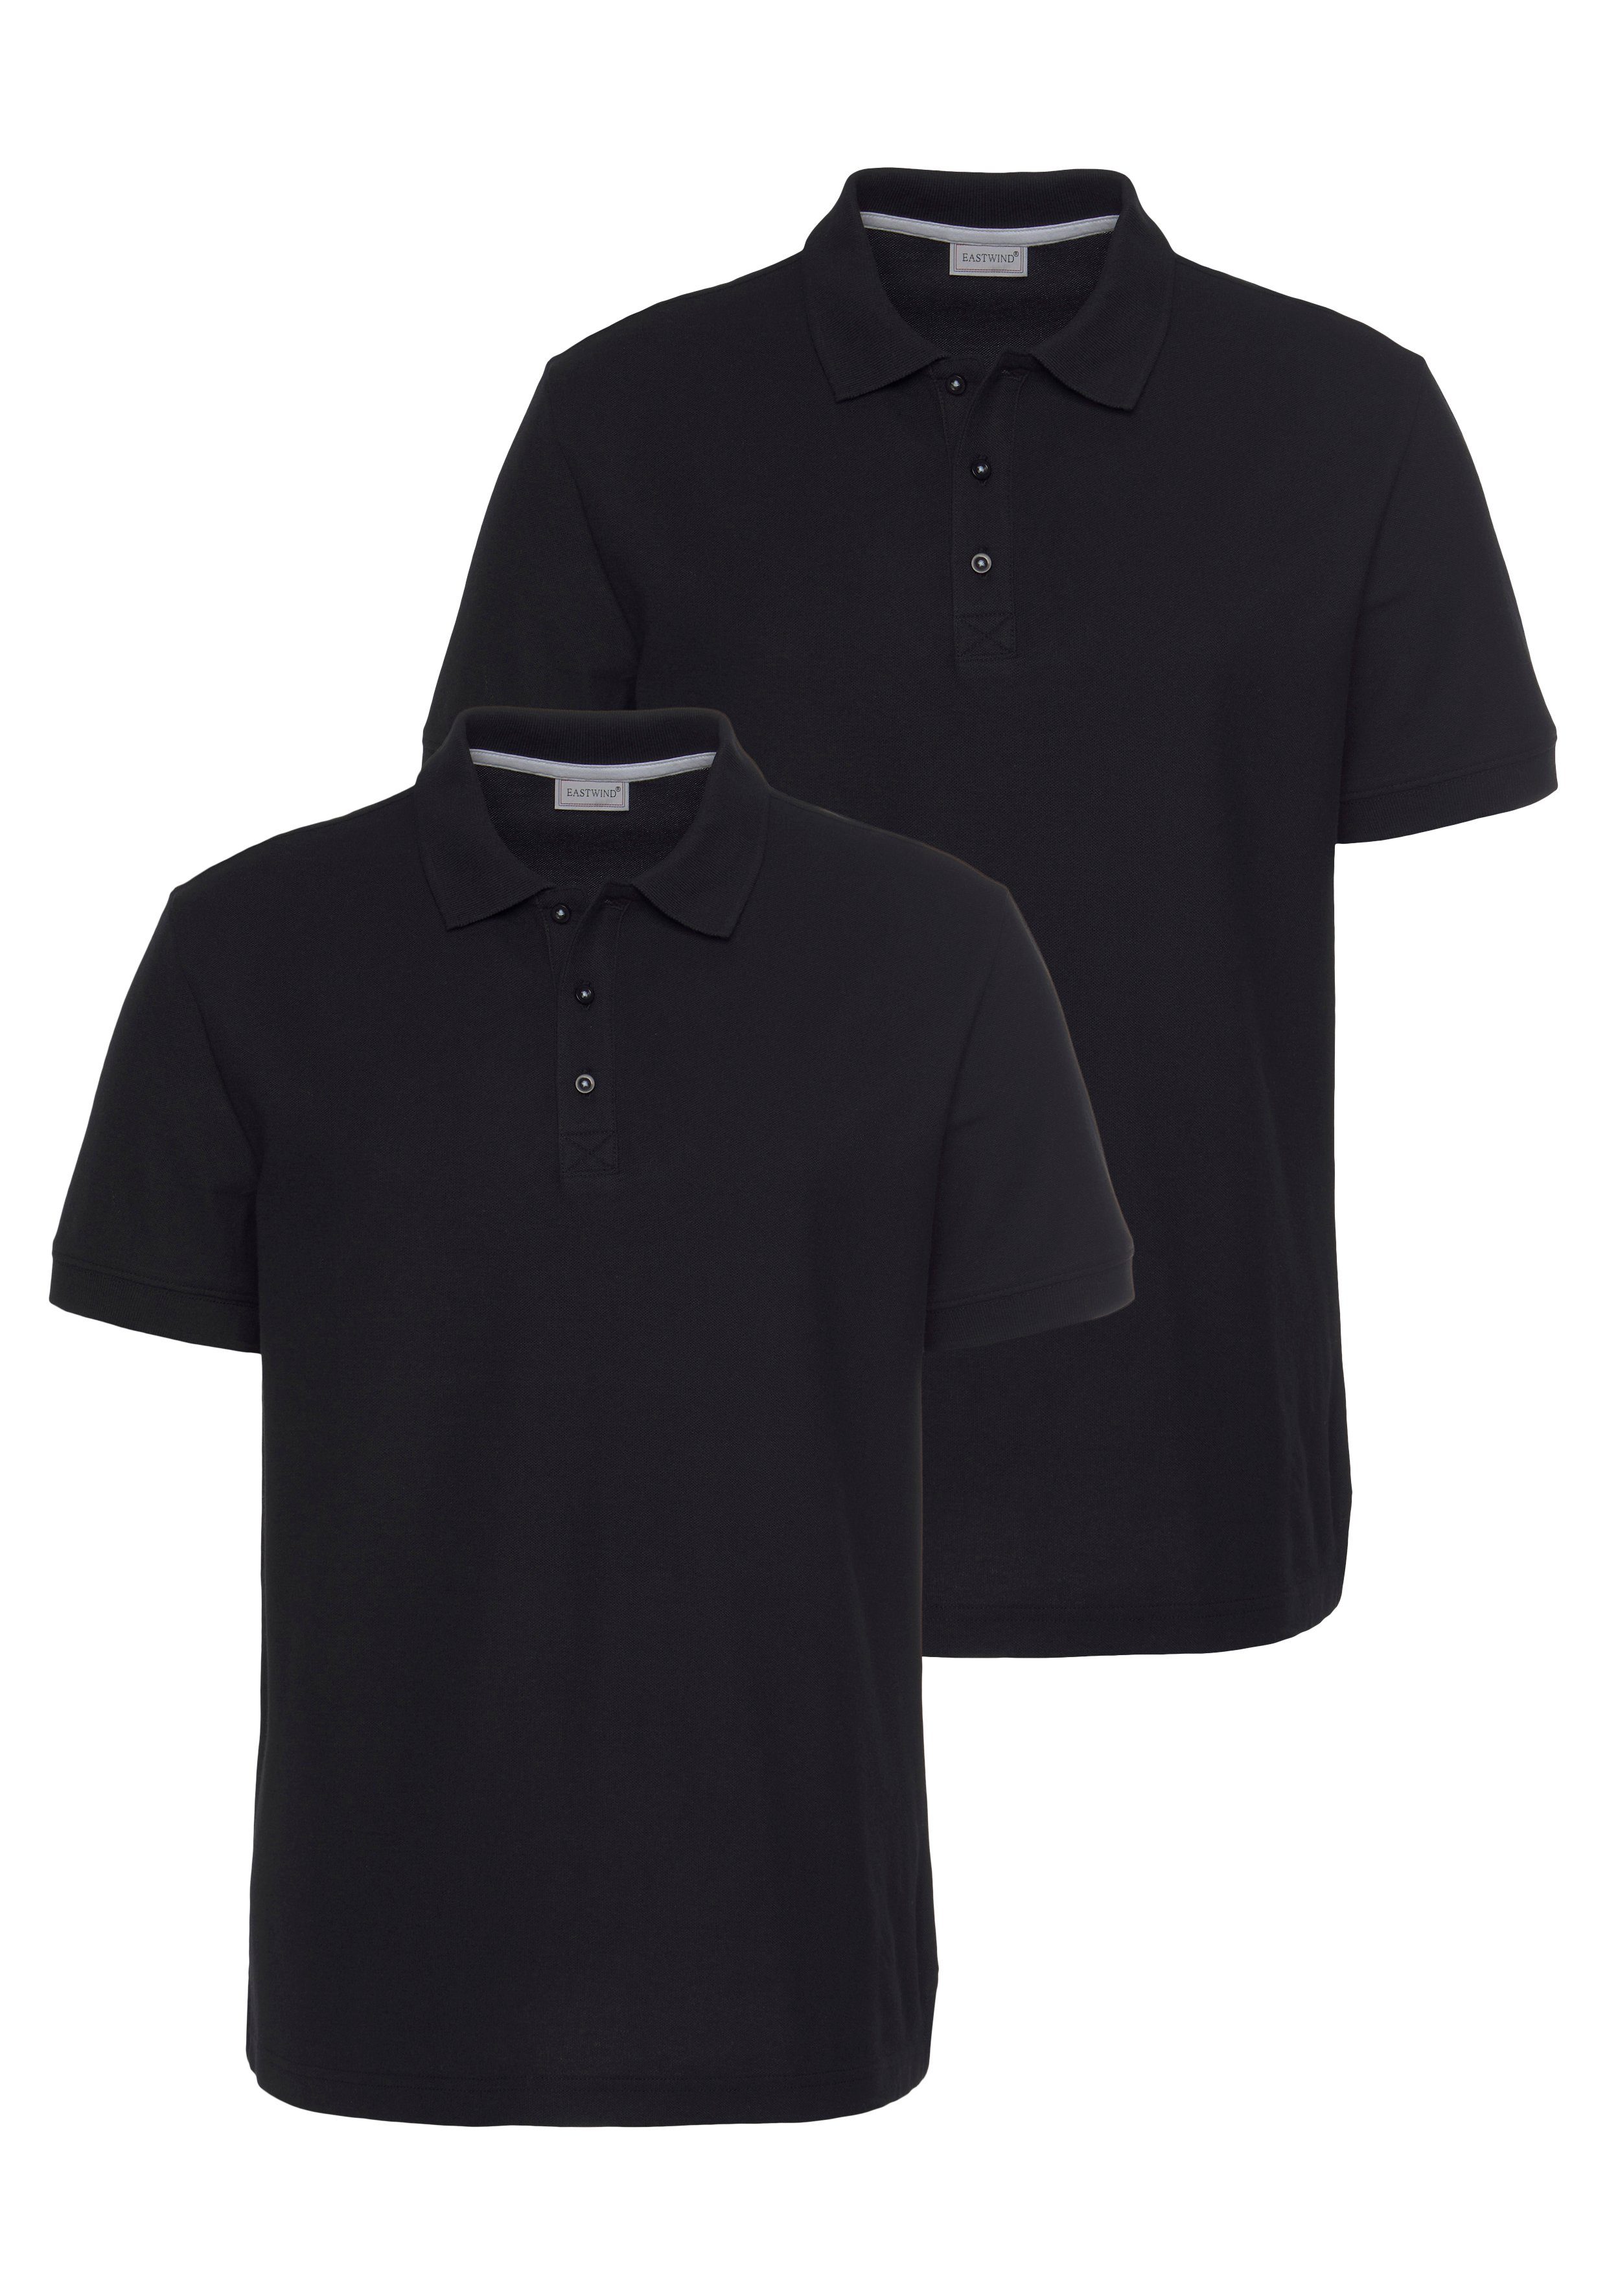 navy+white Poloshirt schwarz Pack (2er-Pack) Eastwind Double Polo,